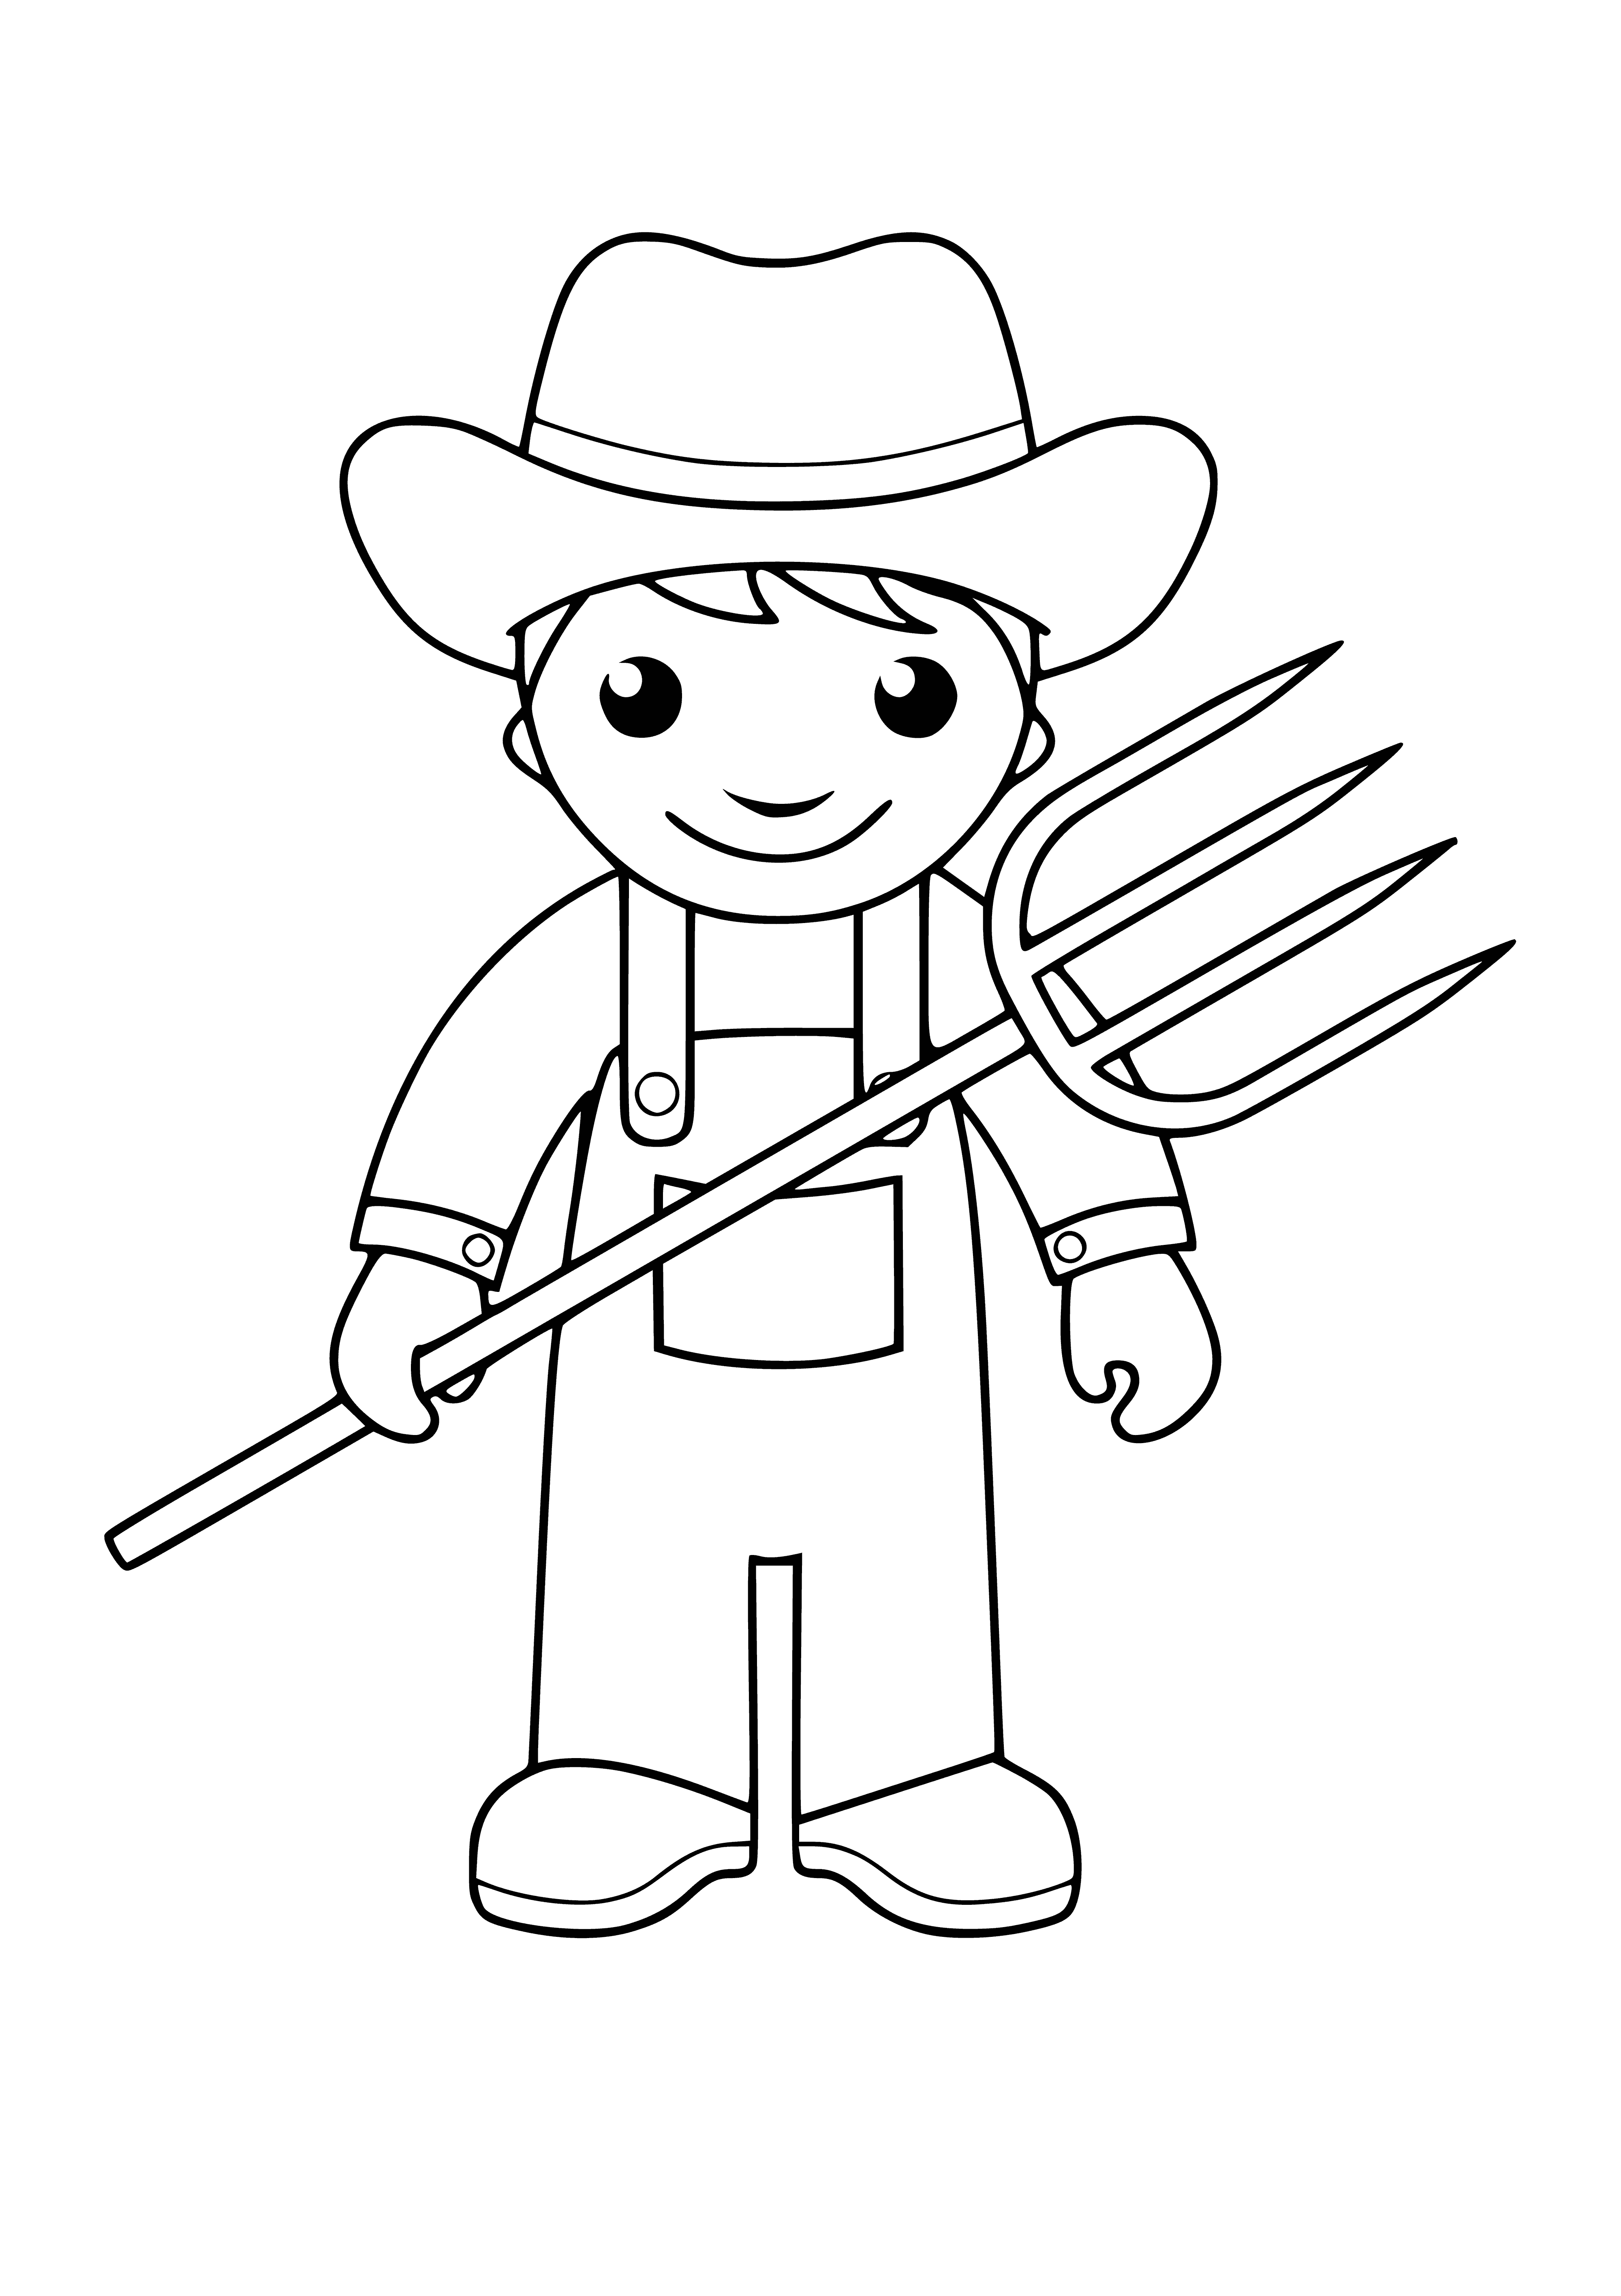 The farmer coloring page